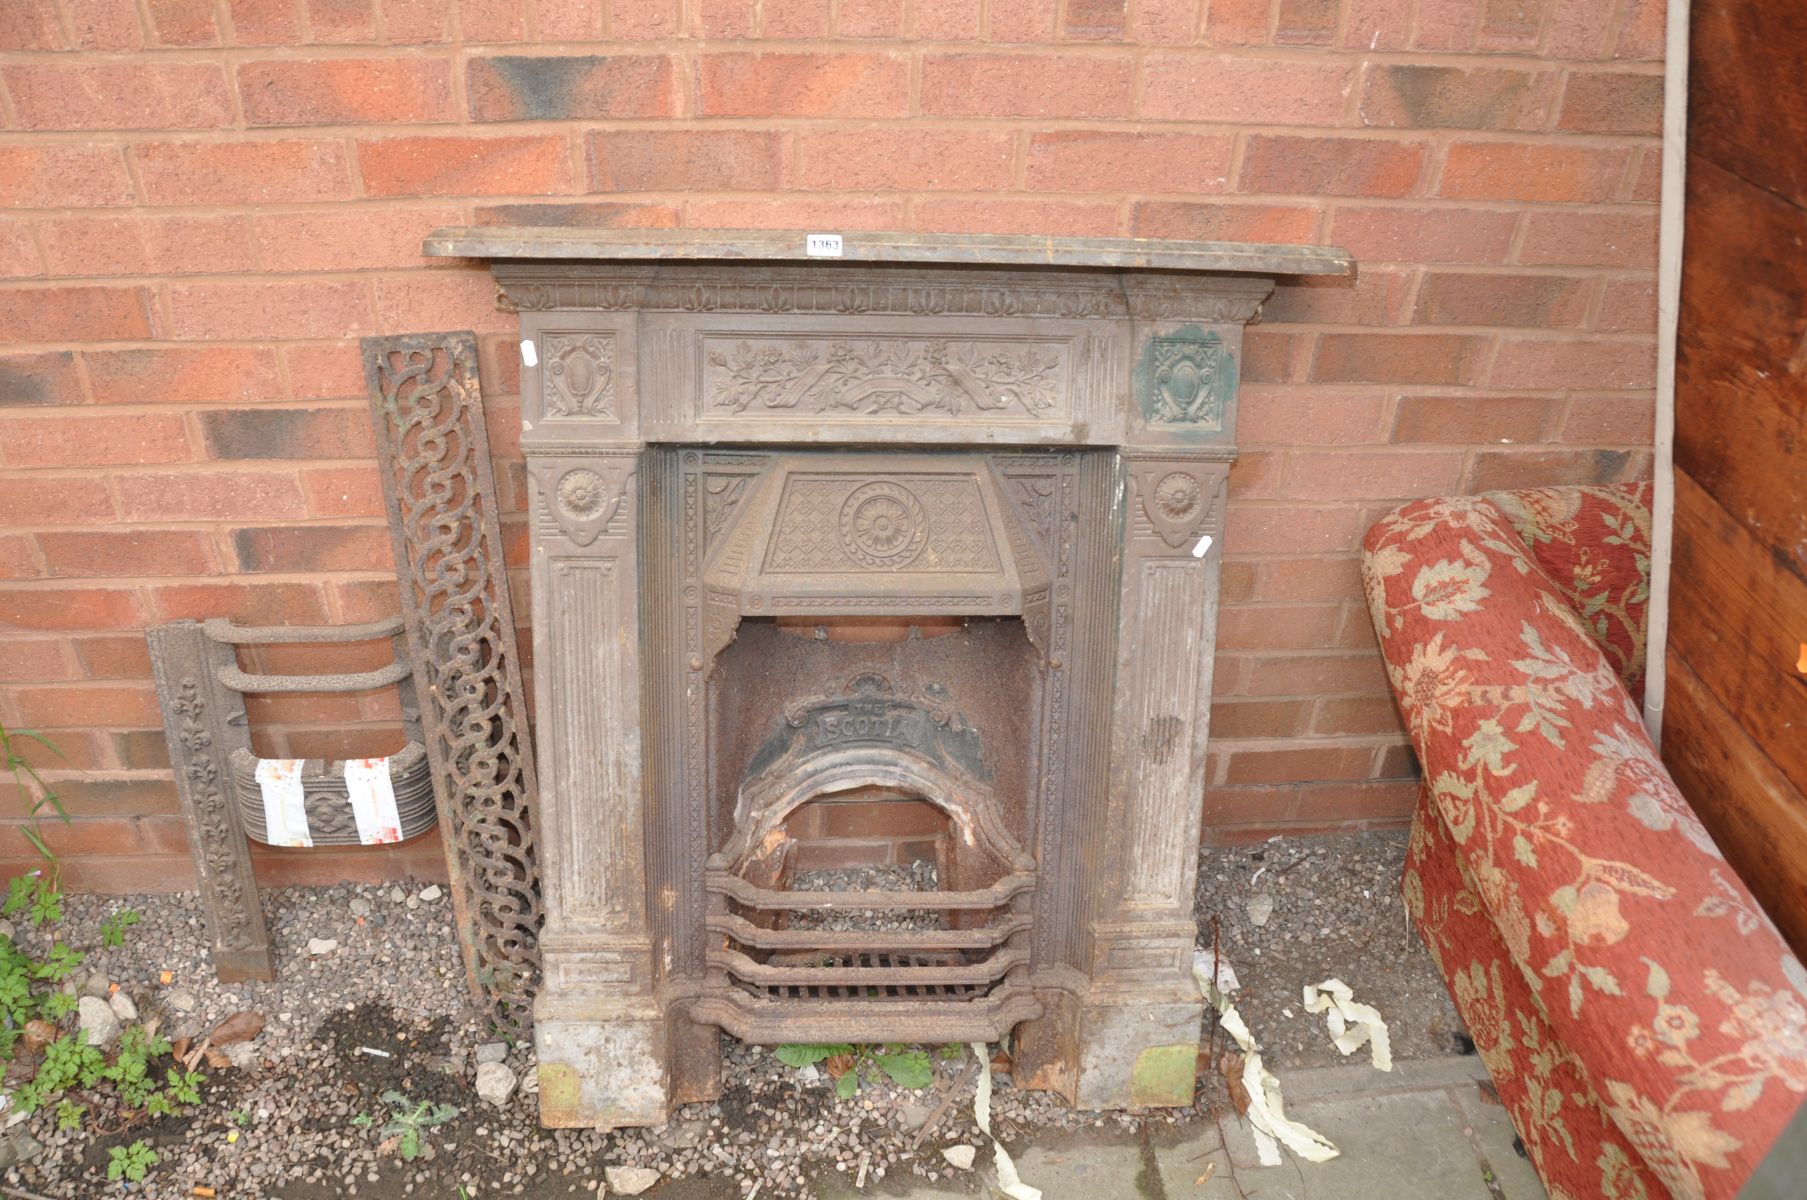 A CAST IRON FIRE SURROUND, with foliate and columned detailing, 'The Scotia' to the centre, along